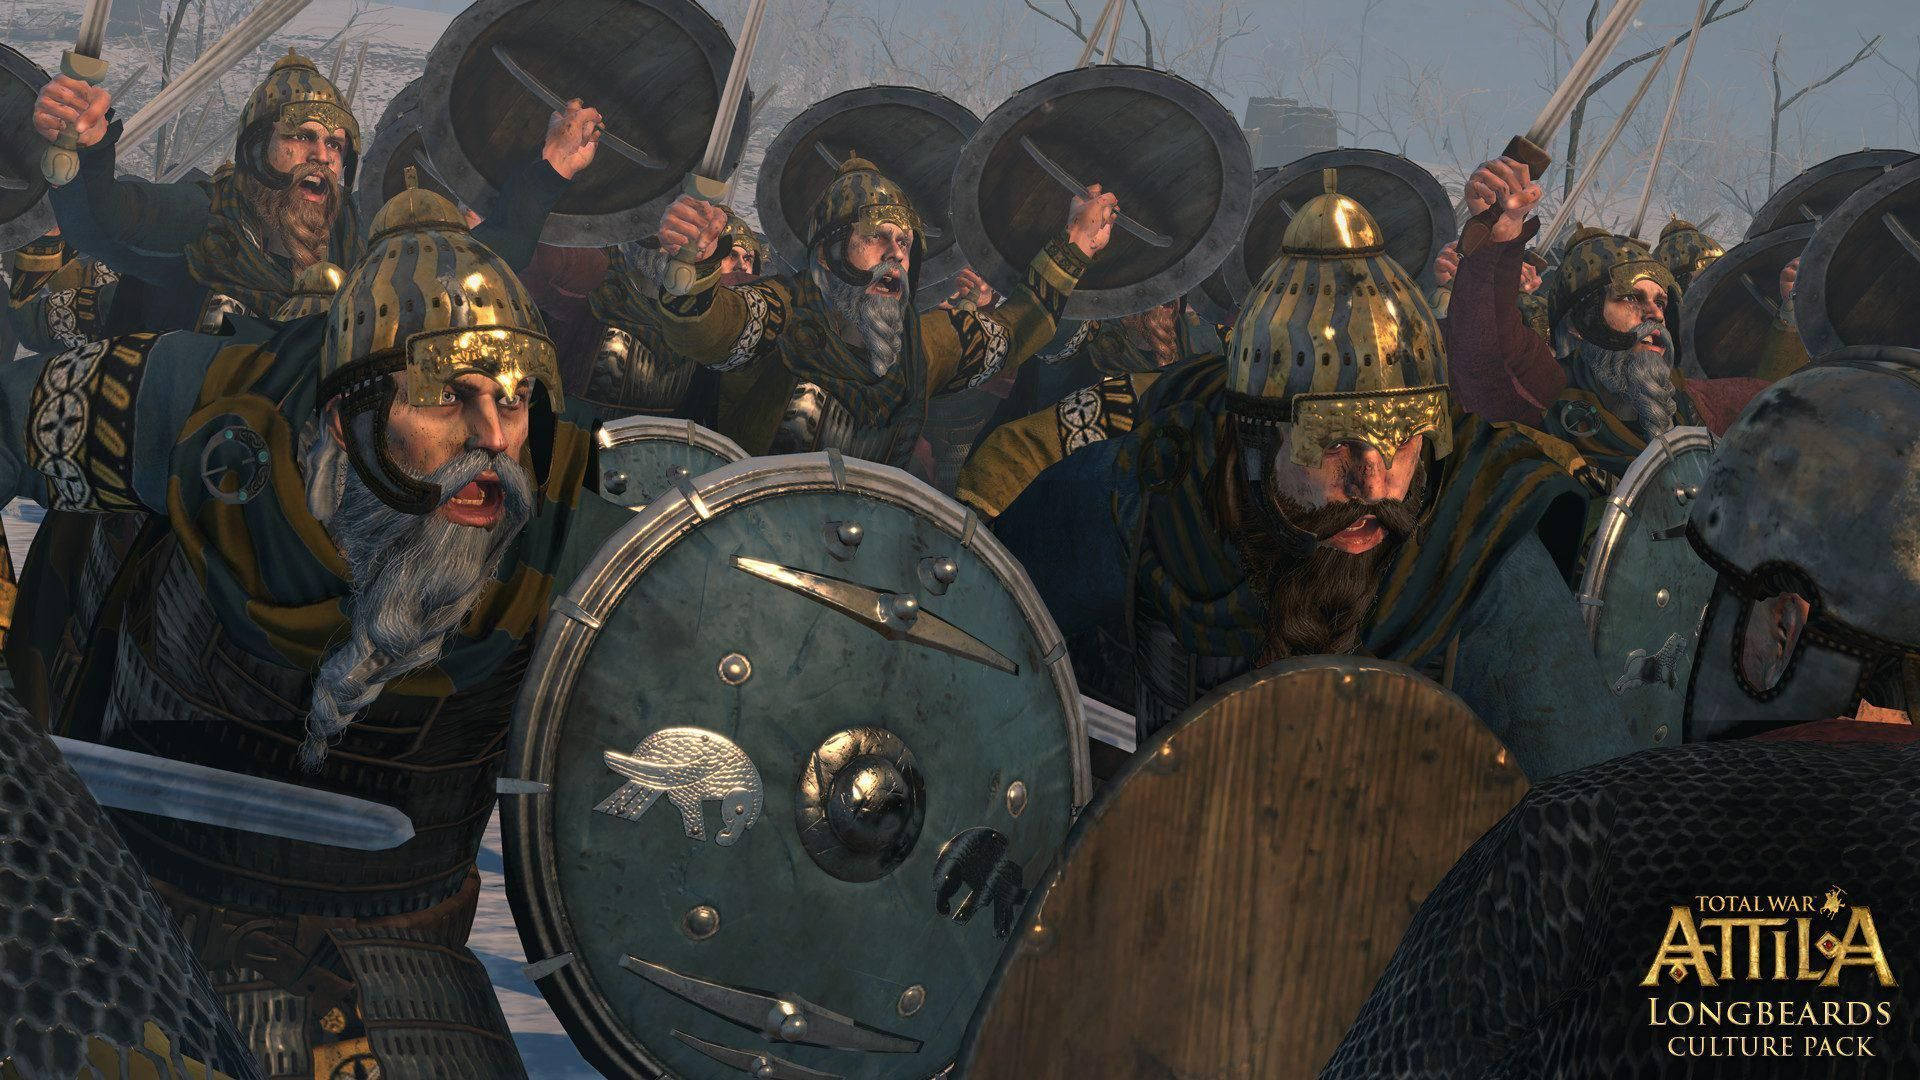 Mighty Soldiers of Total War Attila Preparing for Battle Wallpaper